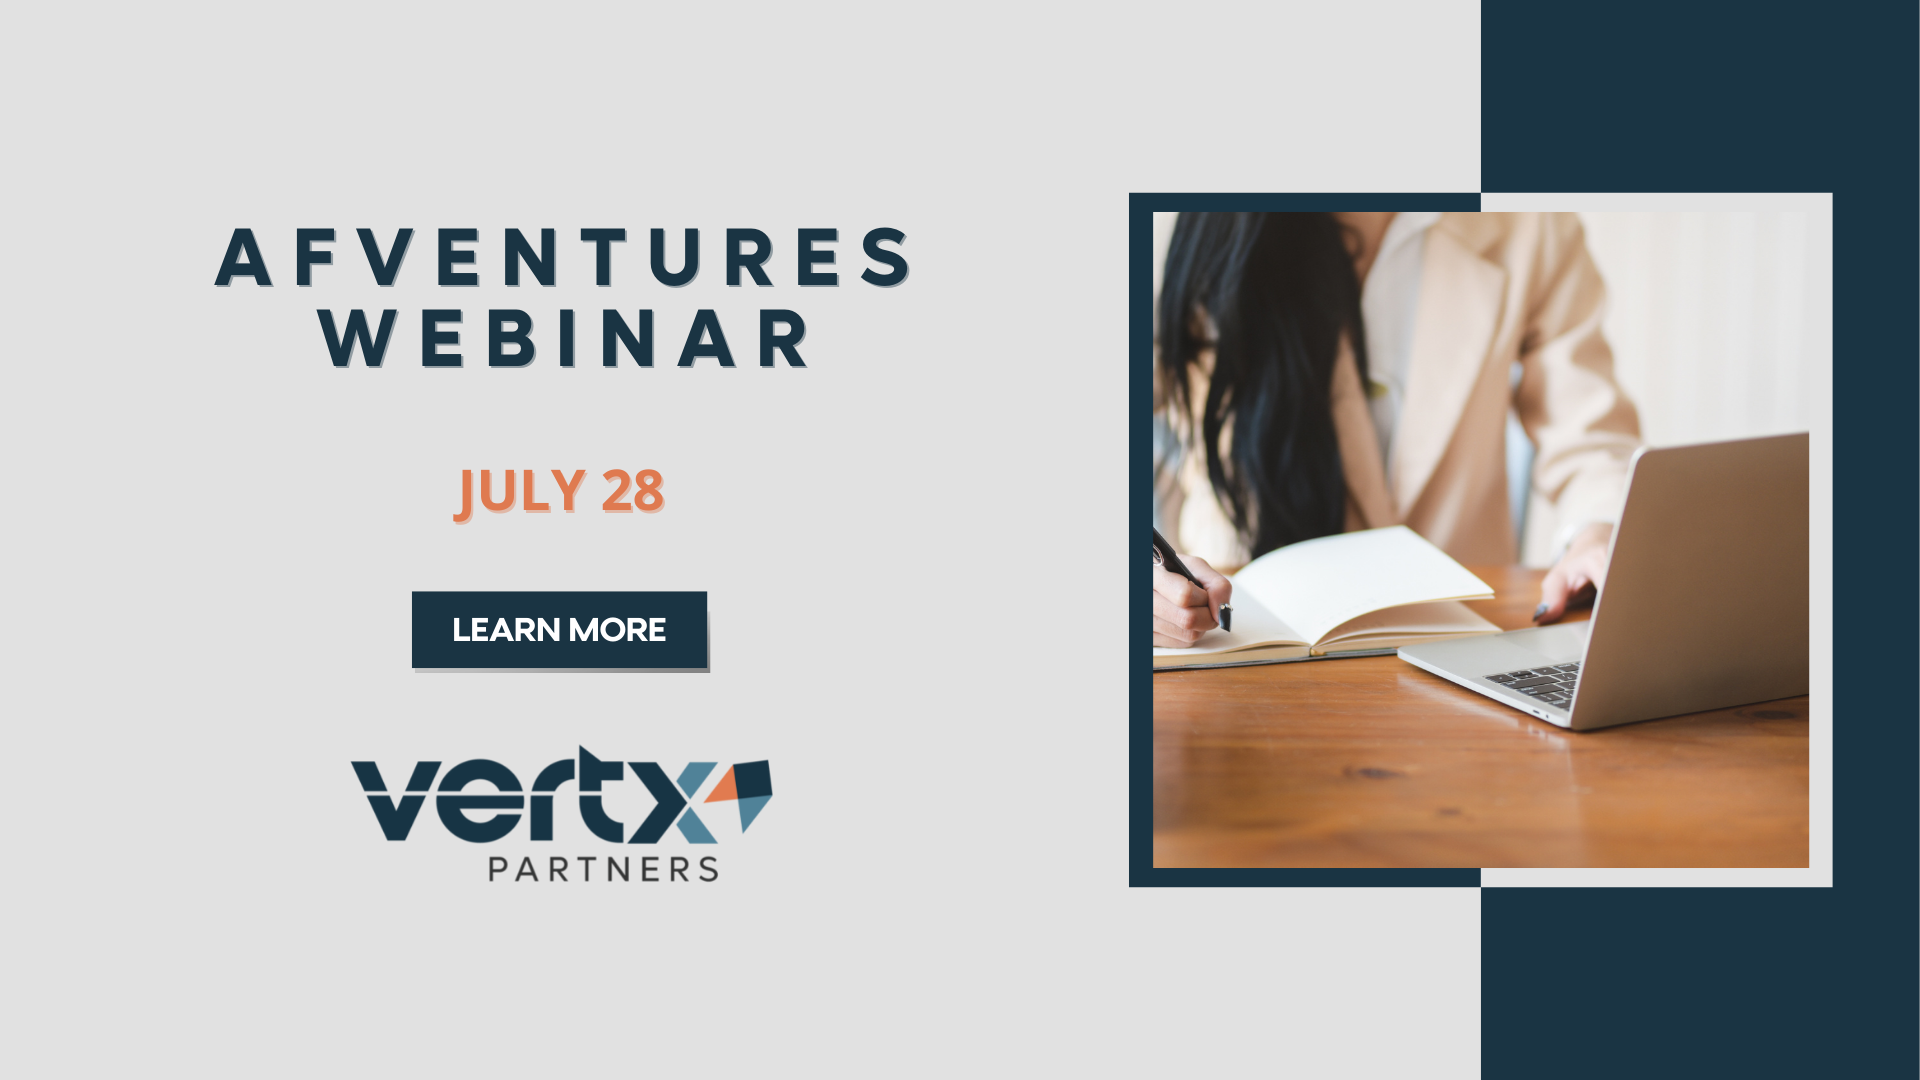 The graphic contains the title of "Afventures Webinar" with the date July 28th with a photo of a woman taking notes in front of her laptop.